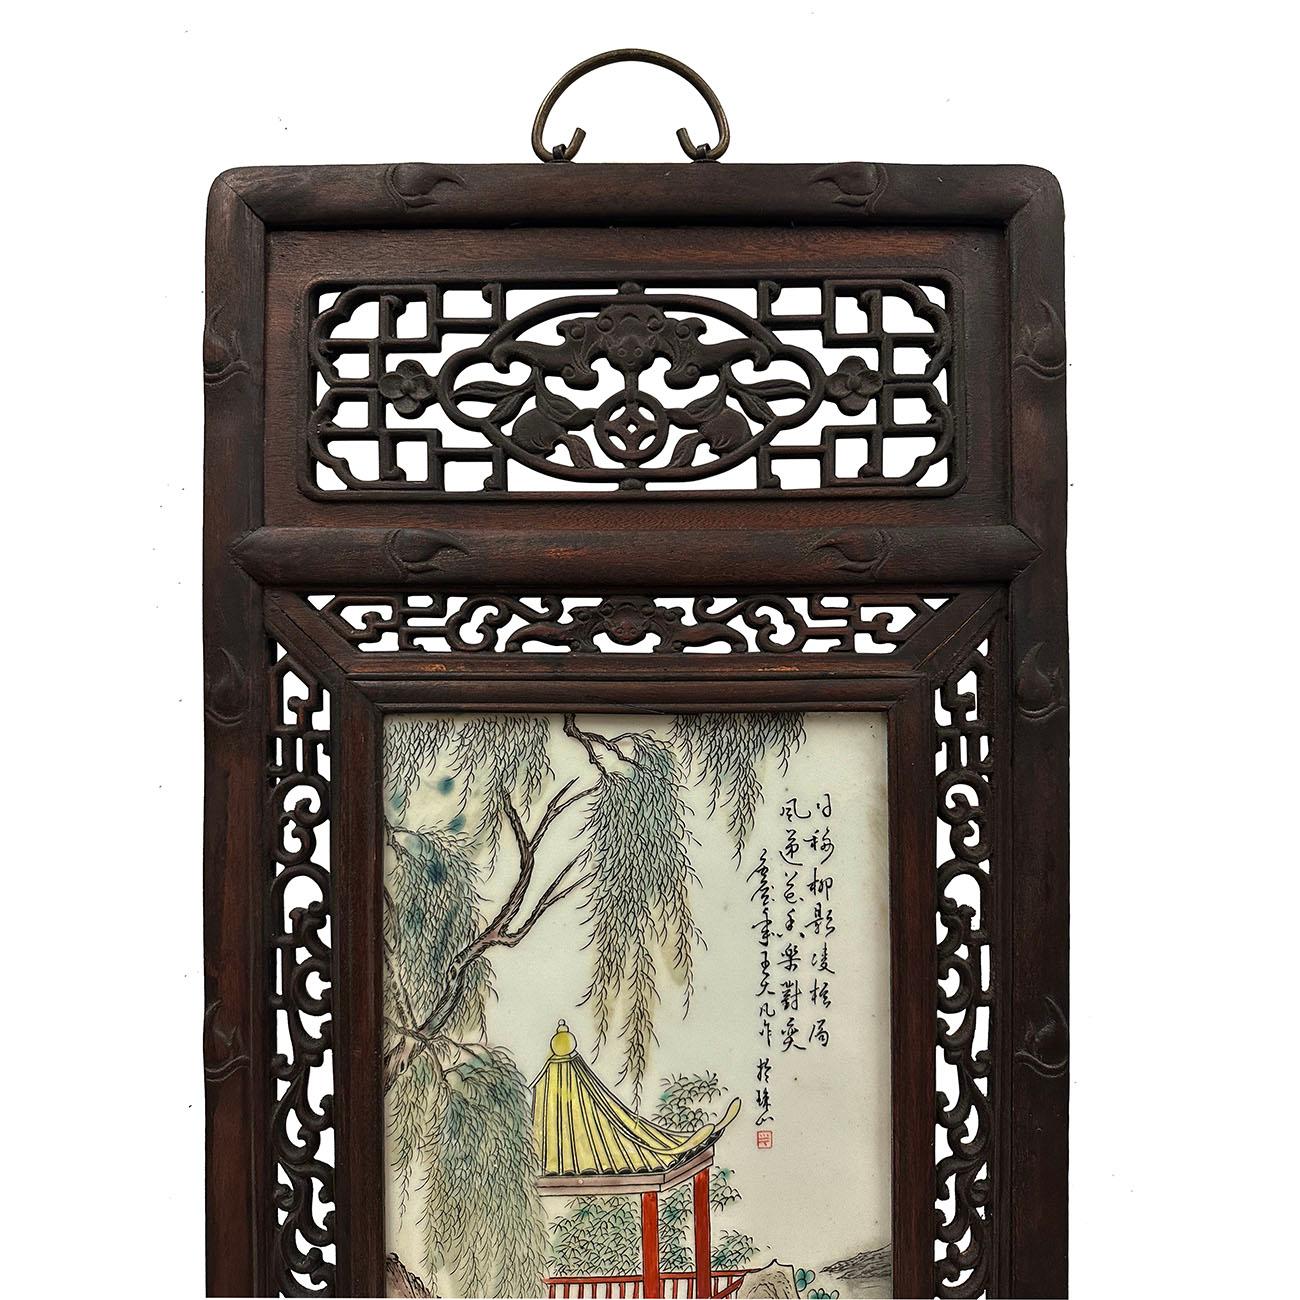 This is a set of 2 panels Chinese antique Painted Porcelain Panels. They were hand made and hand painted. It features beautiful detailed open carved Chinese traditional designed Rosewood frame with Chinese forks art painting on each porcelain panel.